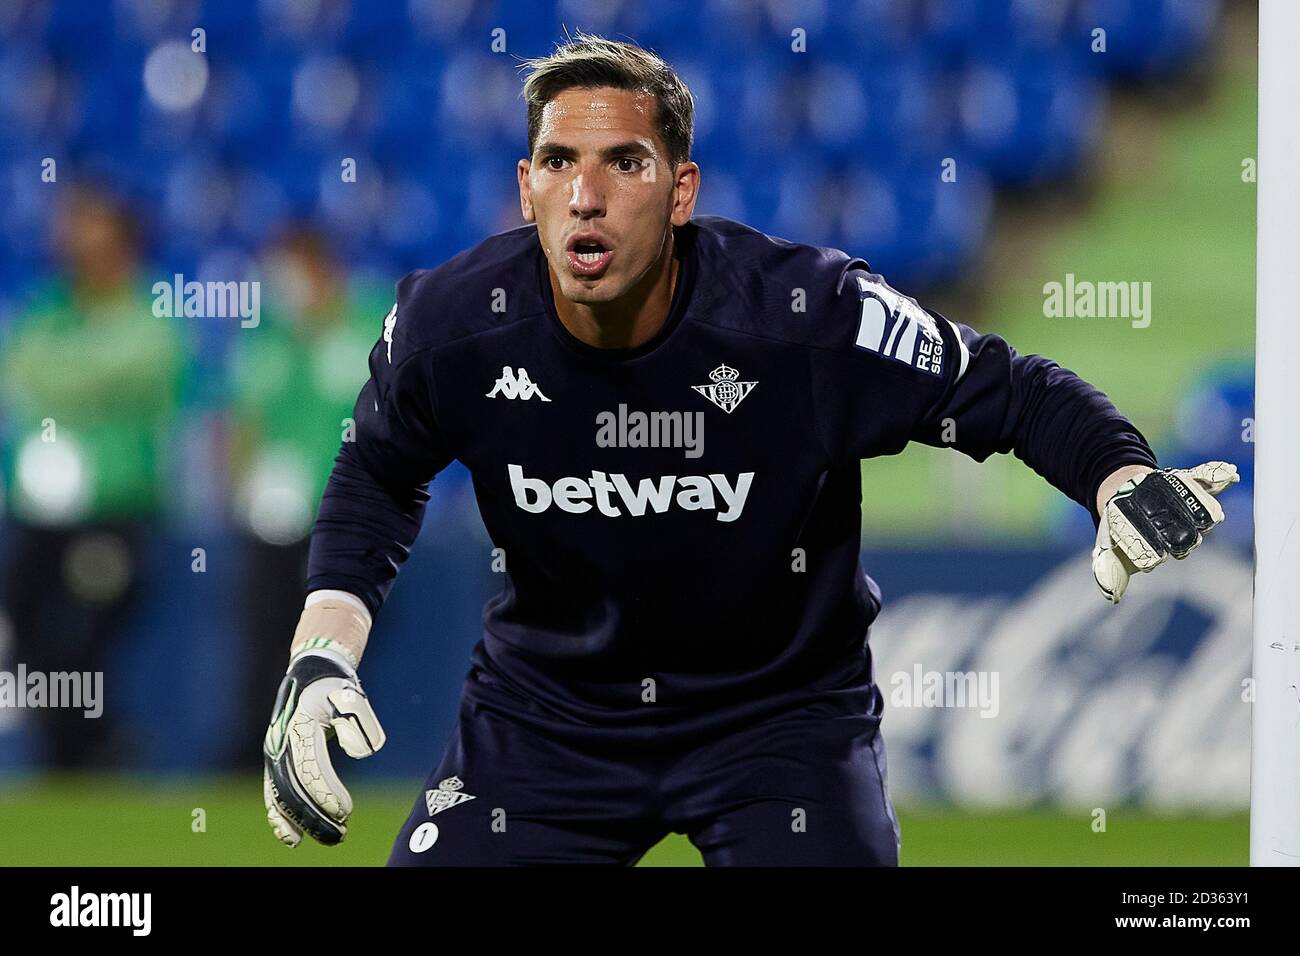 Getafe, Spain. 29th Sep, 2020. Joel Robles of Real Betis during the La Liga match between Getafe CF and Real Betis played at Coliseum Alfonso Perez Stadium on September 29, 2020 in Getafe, Spain. (Photo by Ana Marcos/PRESSINPHOTO) Credit: Pro Shots/Alamy Live News Stock Photo